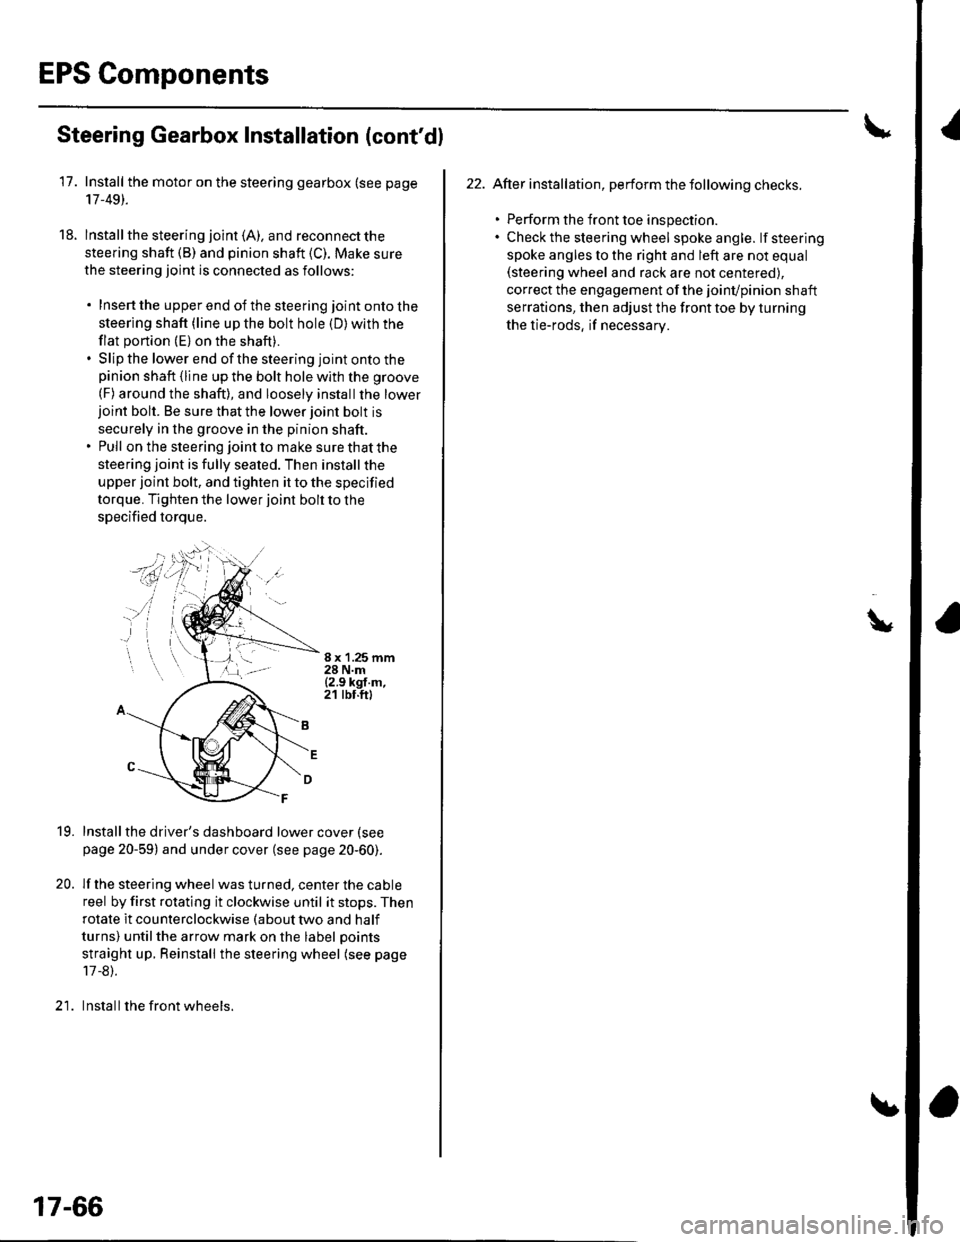 HONDA CIVIC 2003 7.G Workshop Manual EPS Components
4
17.
18.
Steering Gearbox Installation (contdl
Install the motor on the steering gearbox (see page
17-49).
lnstall the steering joint (A). and reconnect the
steering shaft (B) and pin